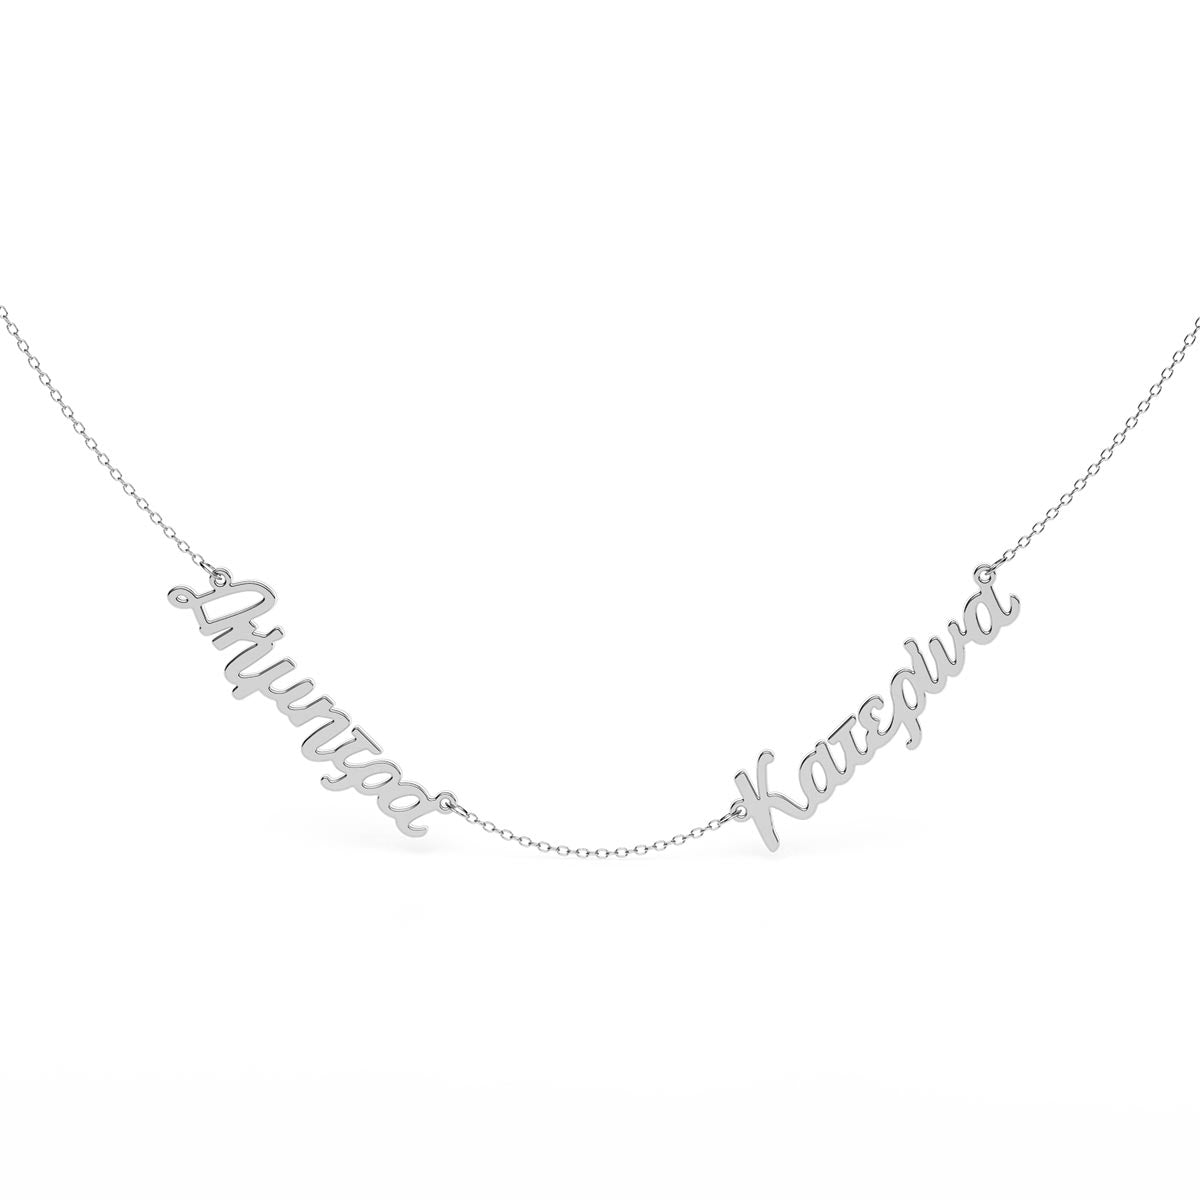 Greek Personalized 2 Name Necklace